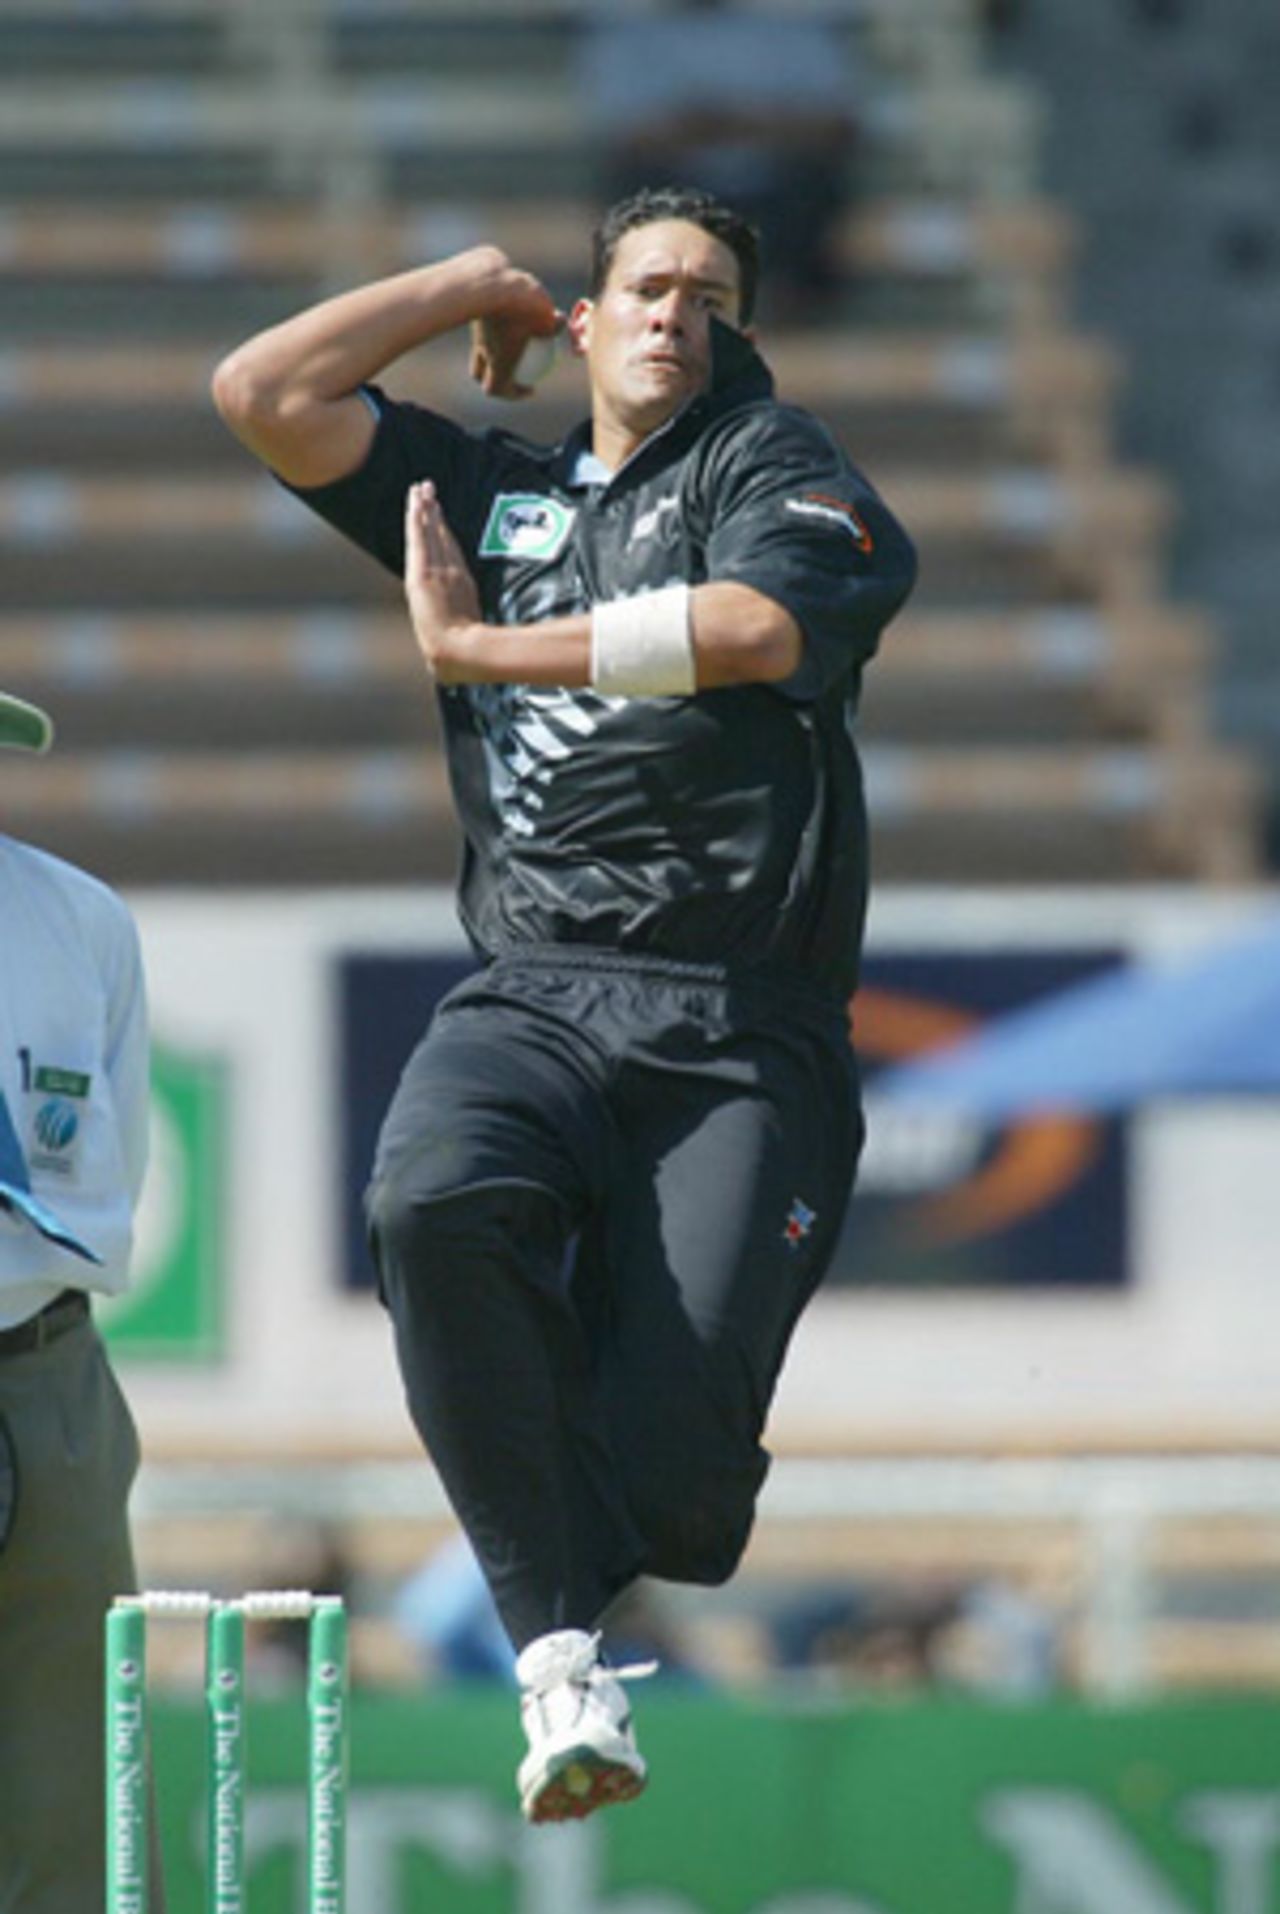 New Zealand bowler Daryl Tuffey delivers a ball during his spell of 2-11 from 10 overs. 3rd ODI: New Zealand v India at Jade Stadium, Christchurch, 1 January 2003.